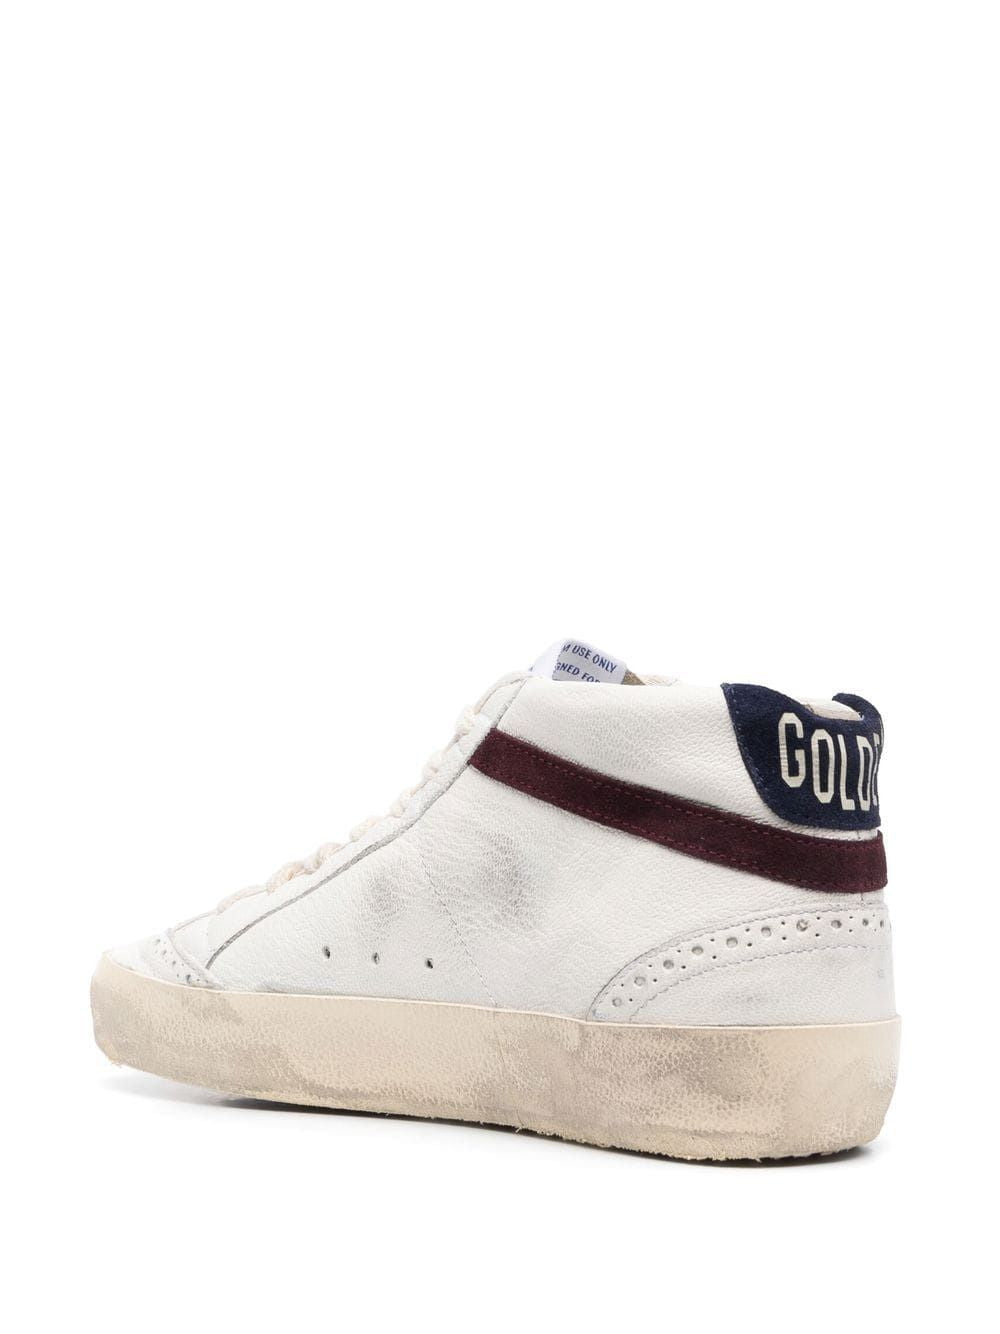 GOLDEN GOOSE Women's Mid Star Leather Sneakers- White/Silver